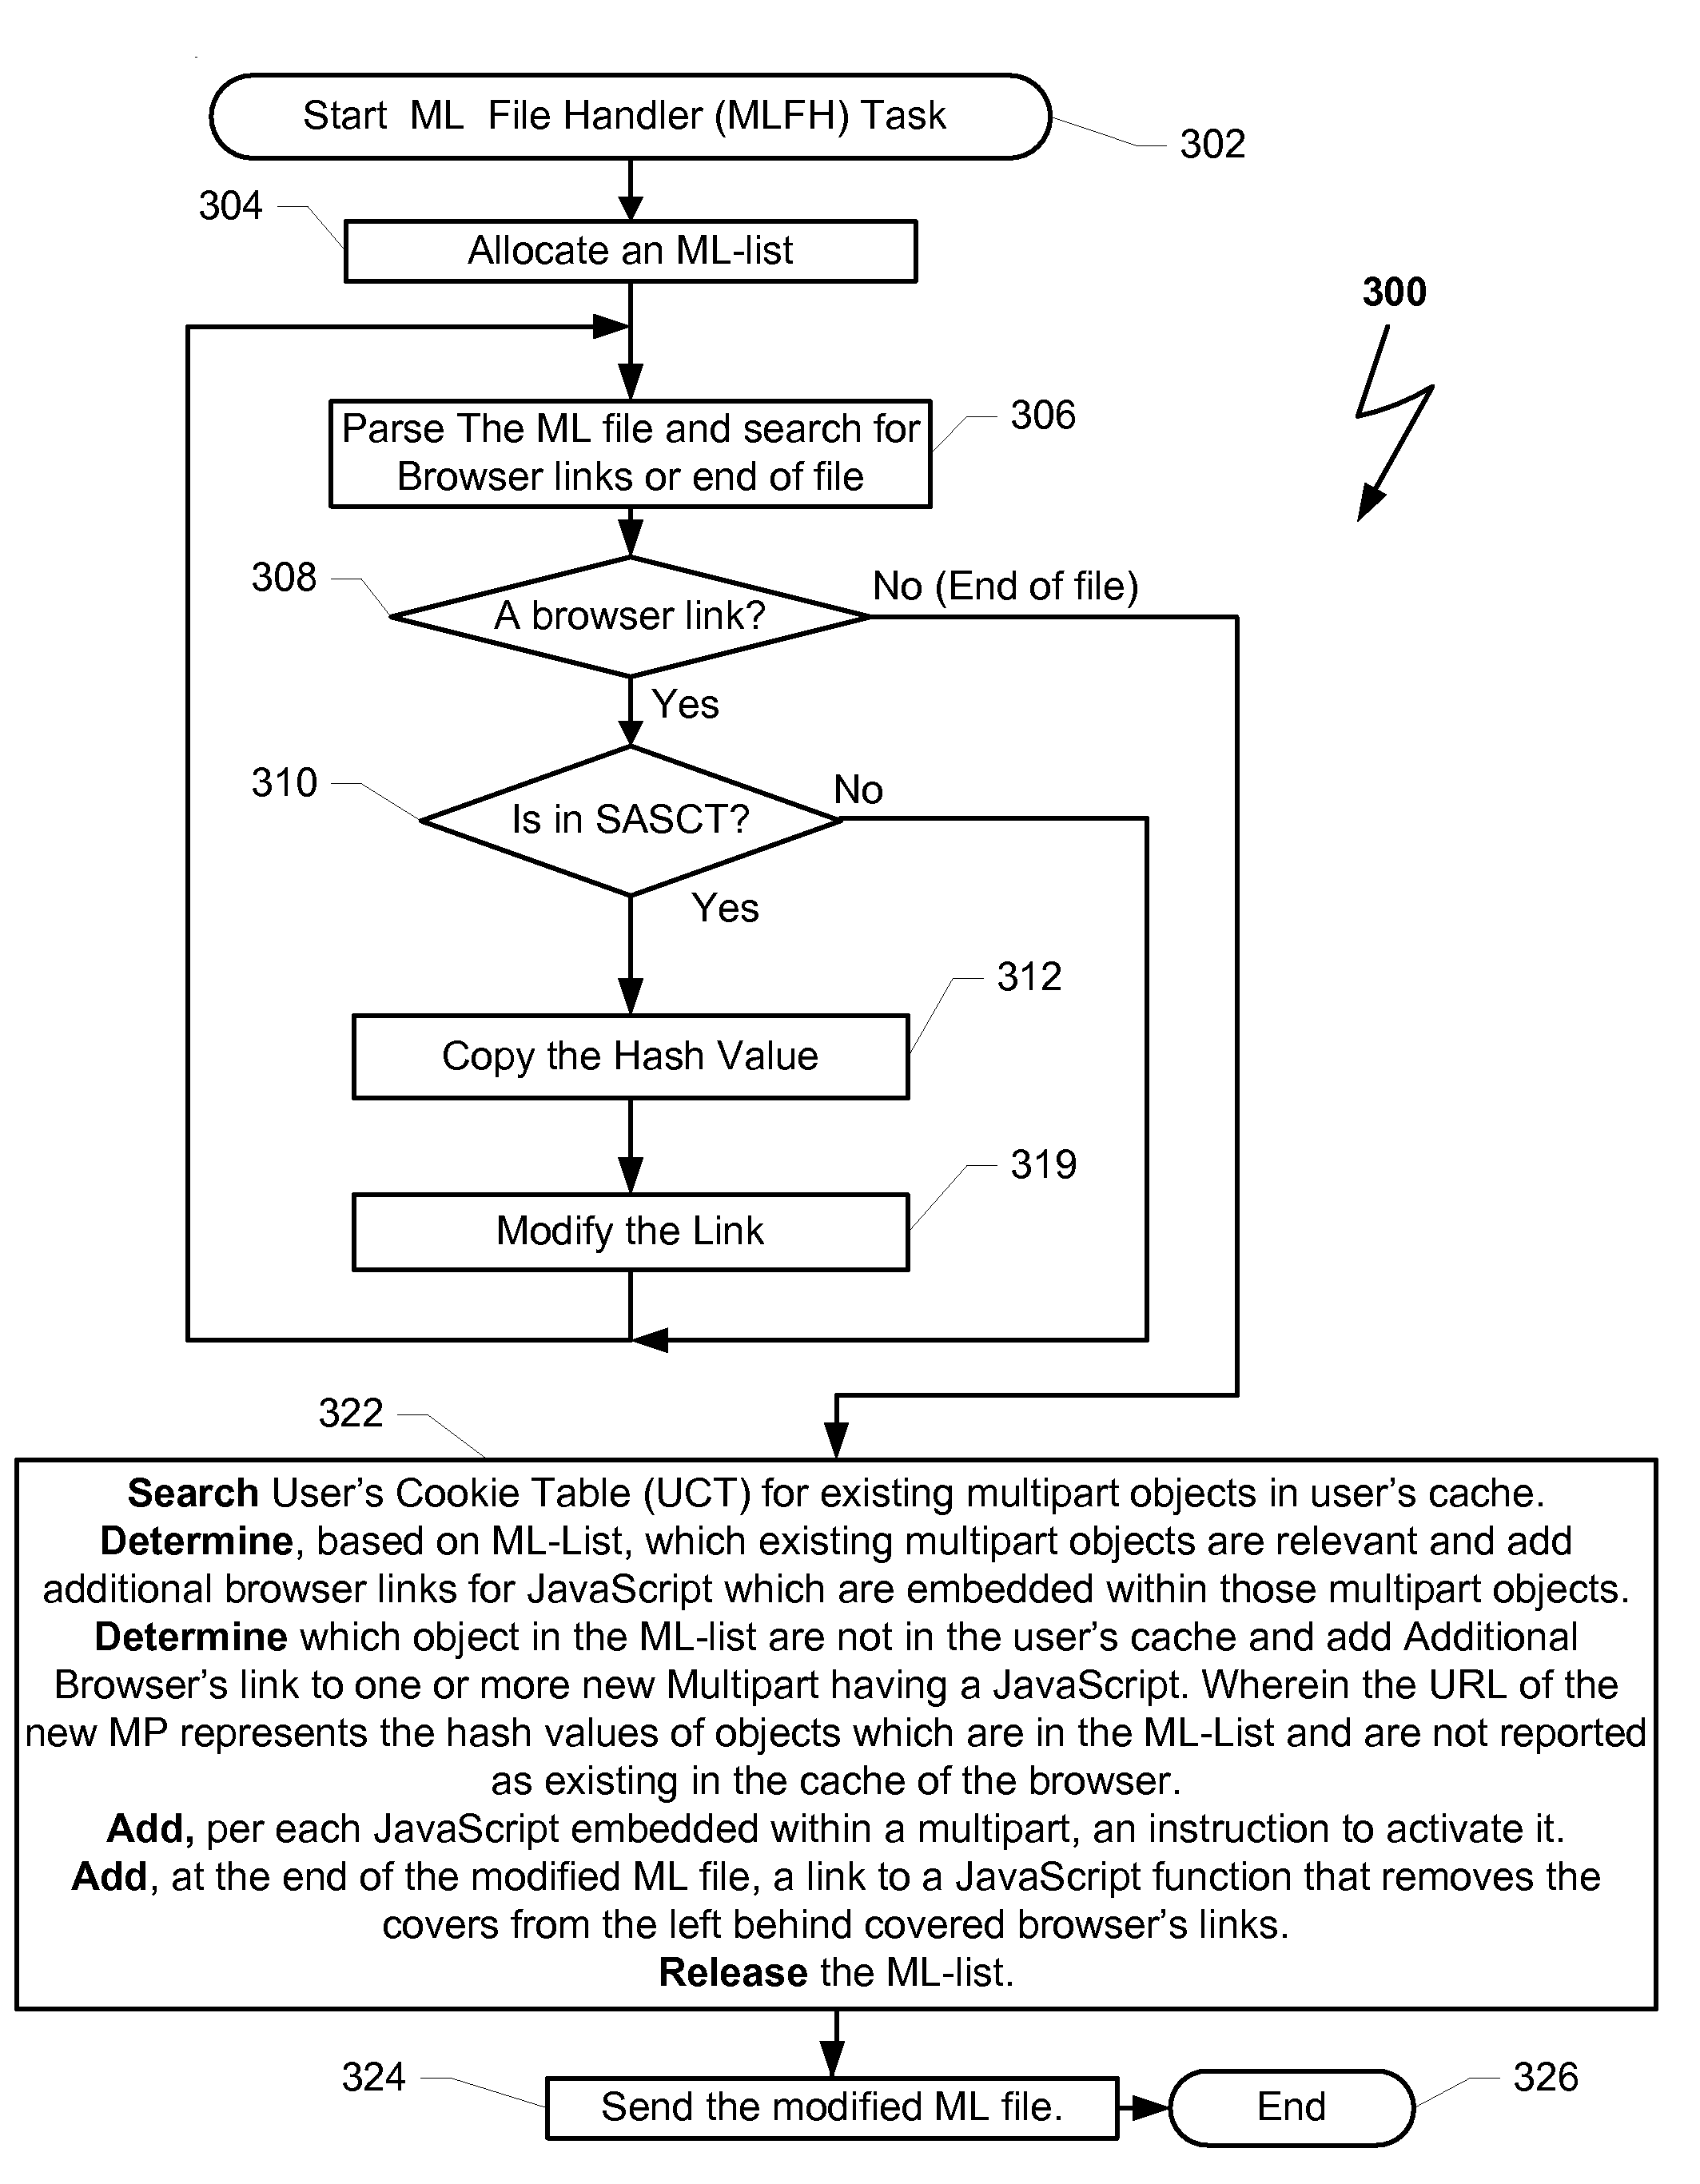 Method and system for accelerating browsing sessions